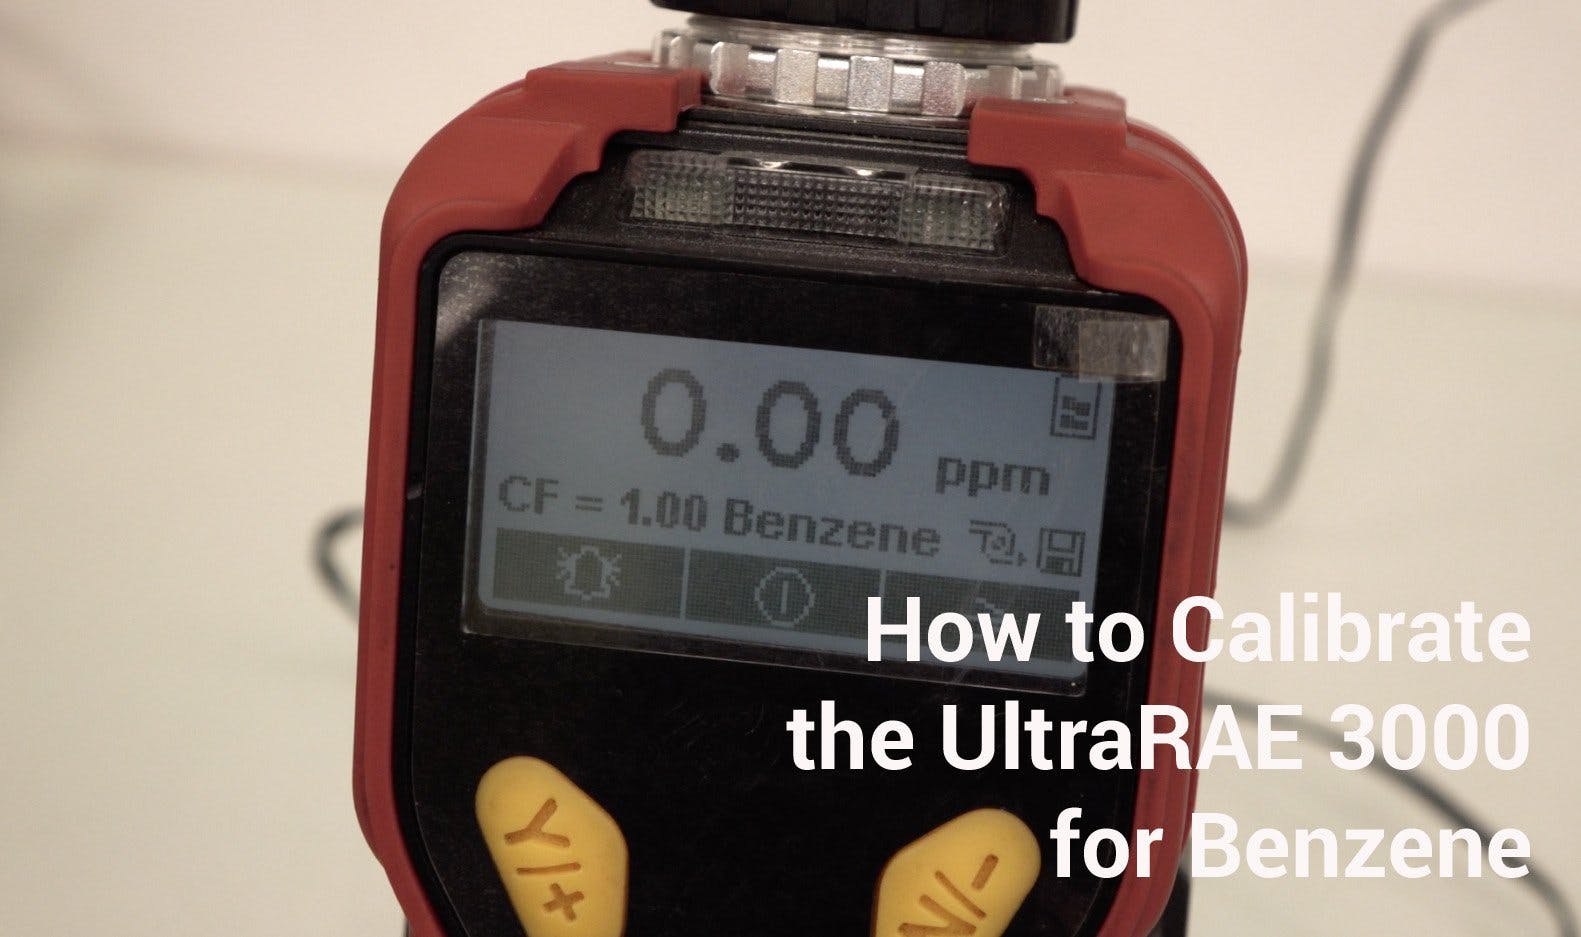 UltraRAE 3000 - How to Calibrate for Benzene Monitoring